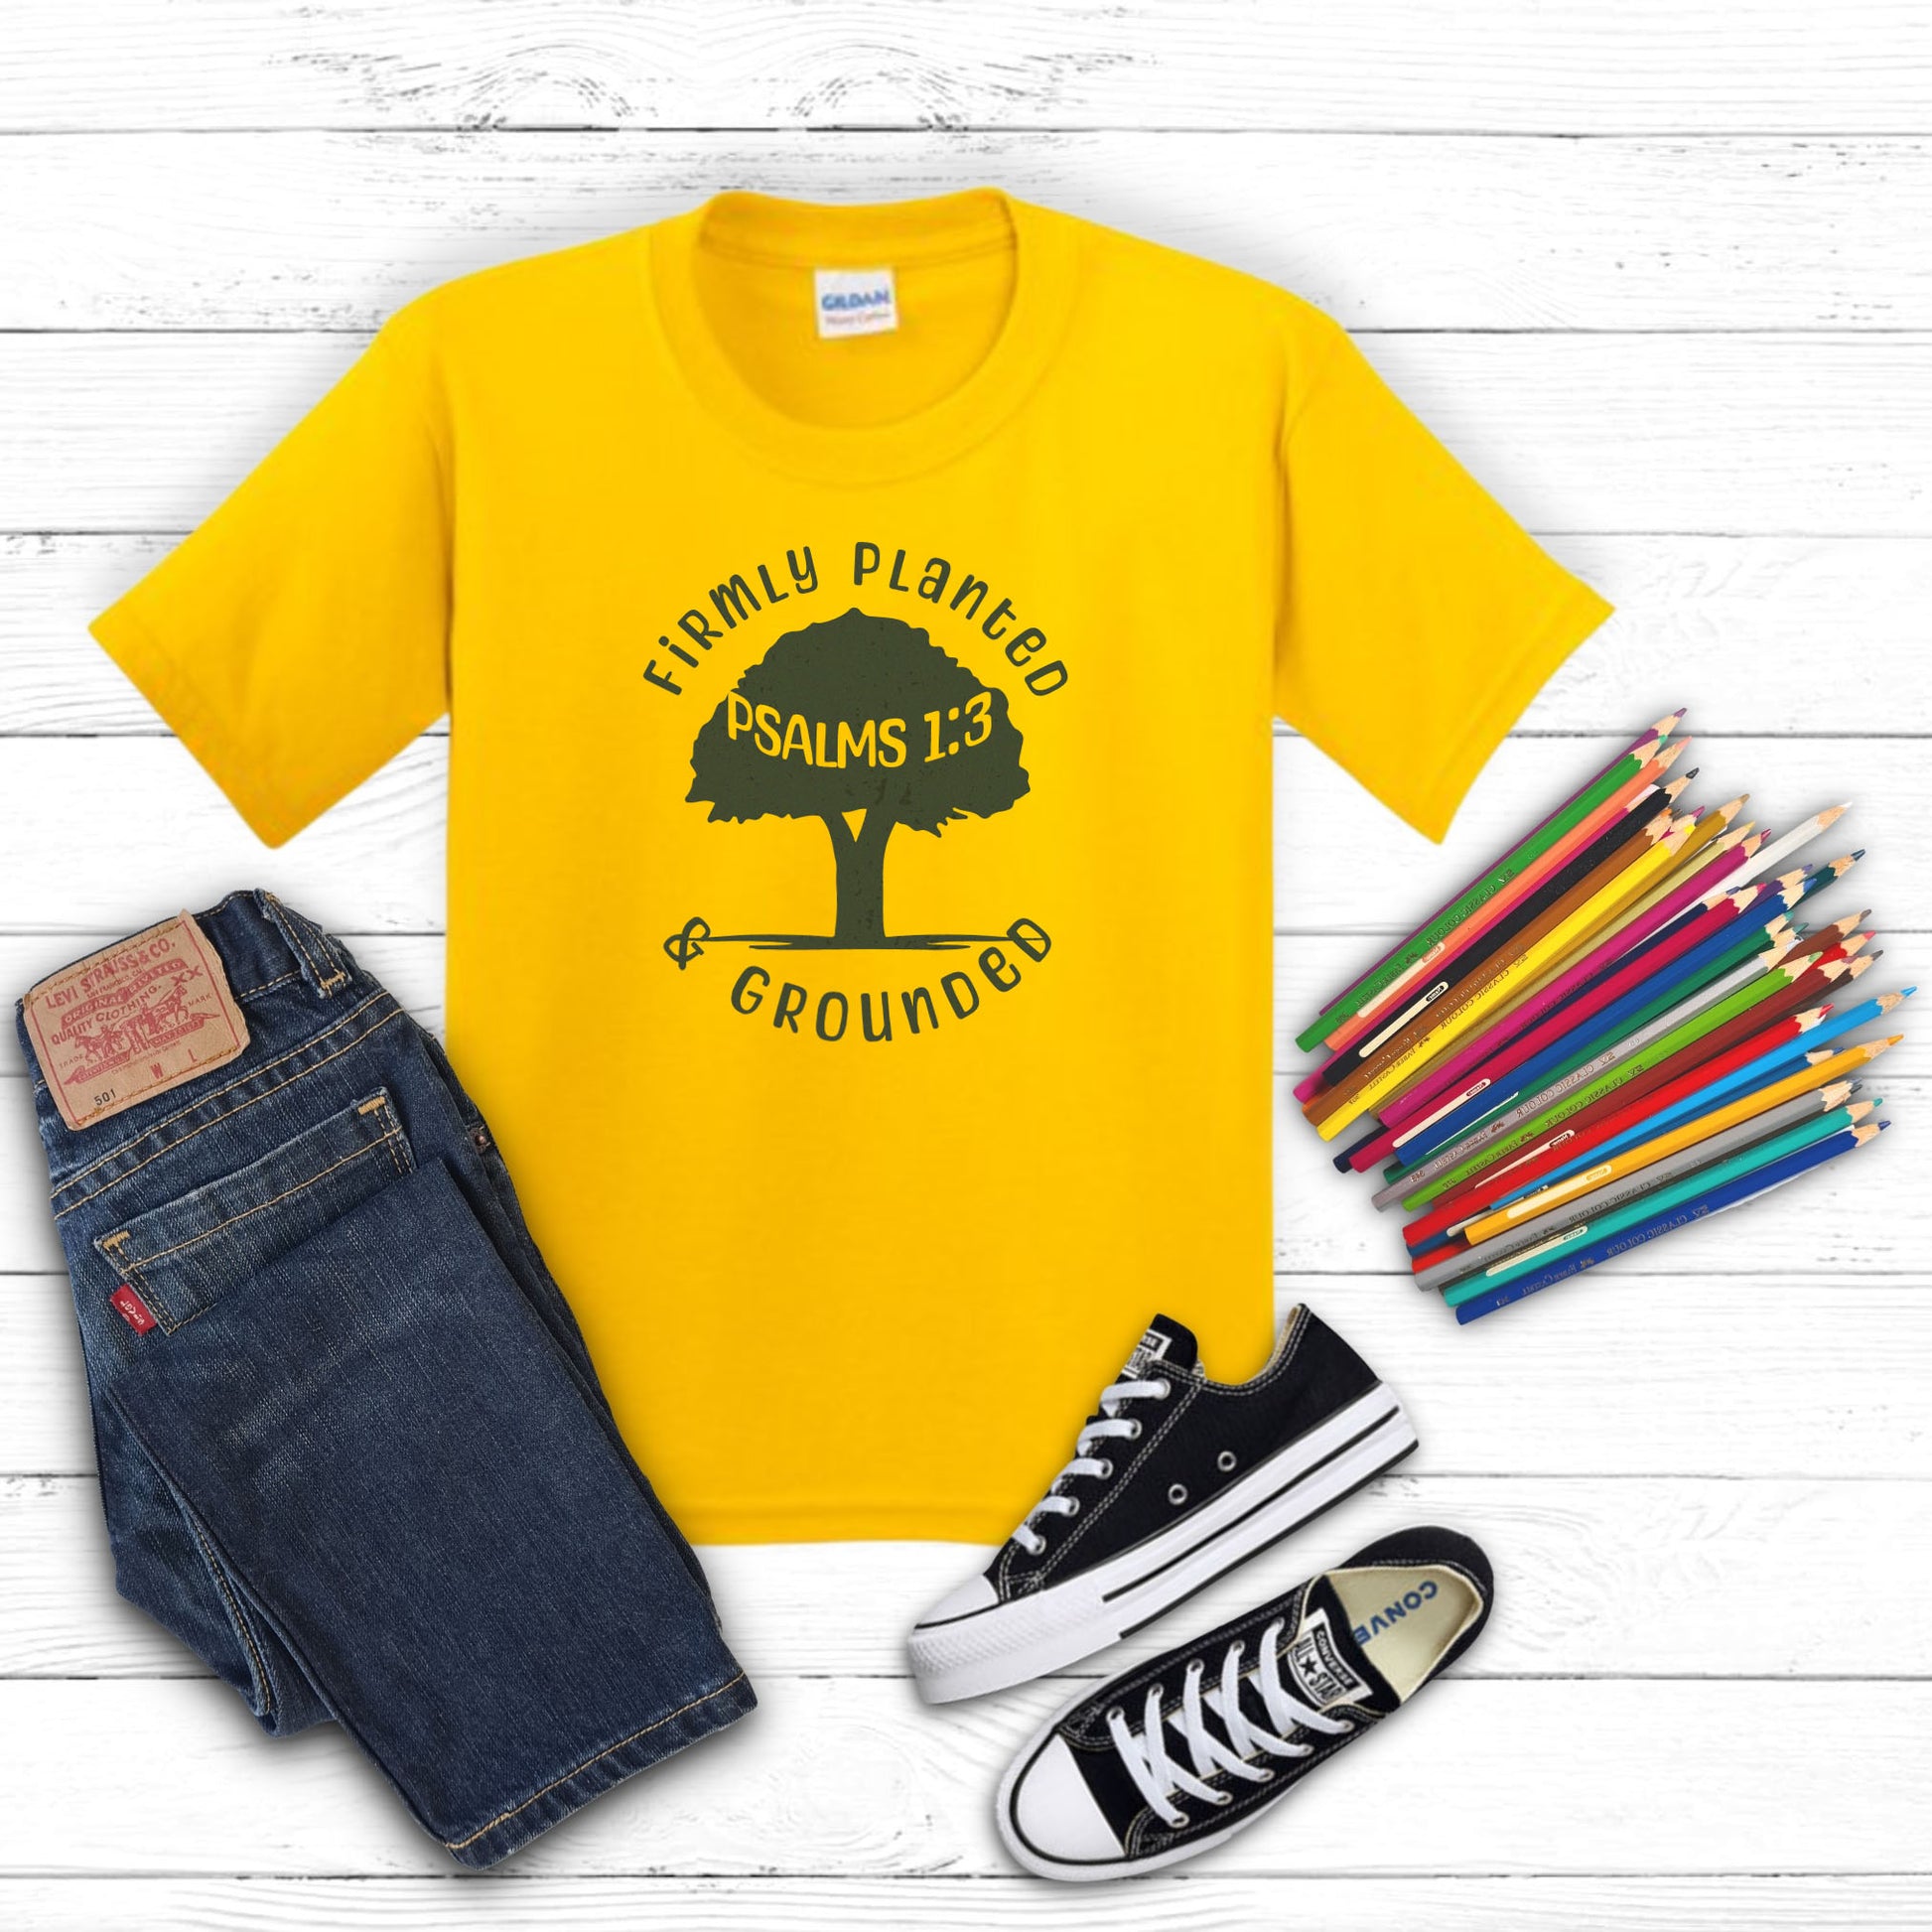 Firmly Planted kids t-shirt in Daisy